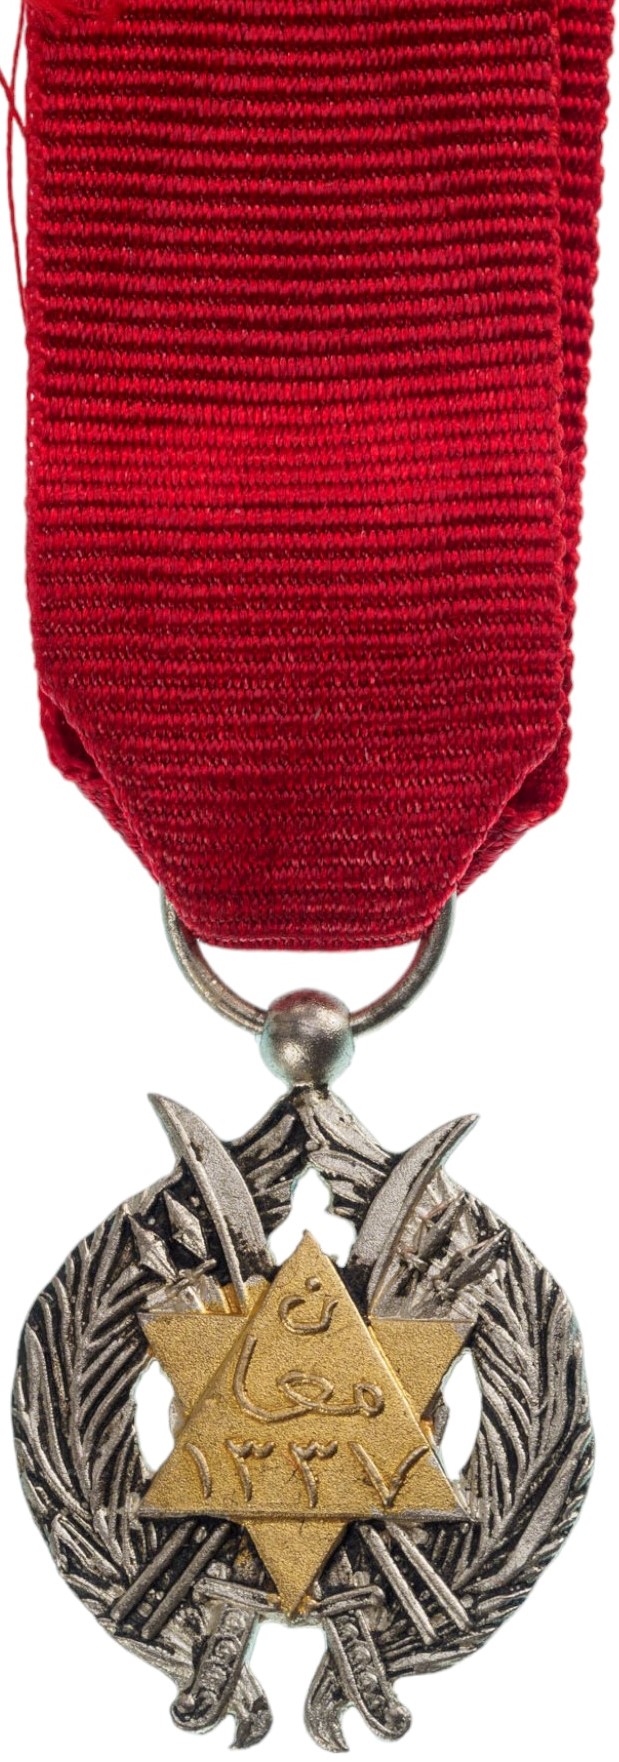 Trans-Jordan Ma'an Medal, instituted in 1918.